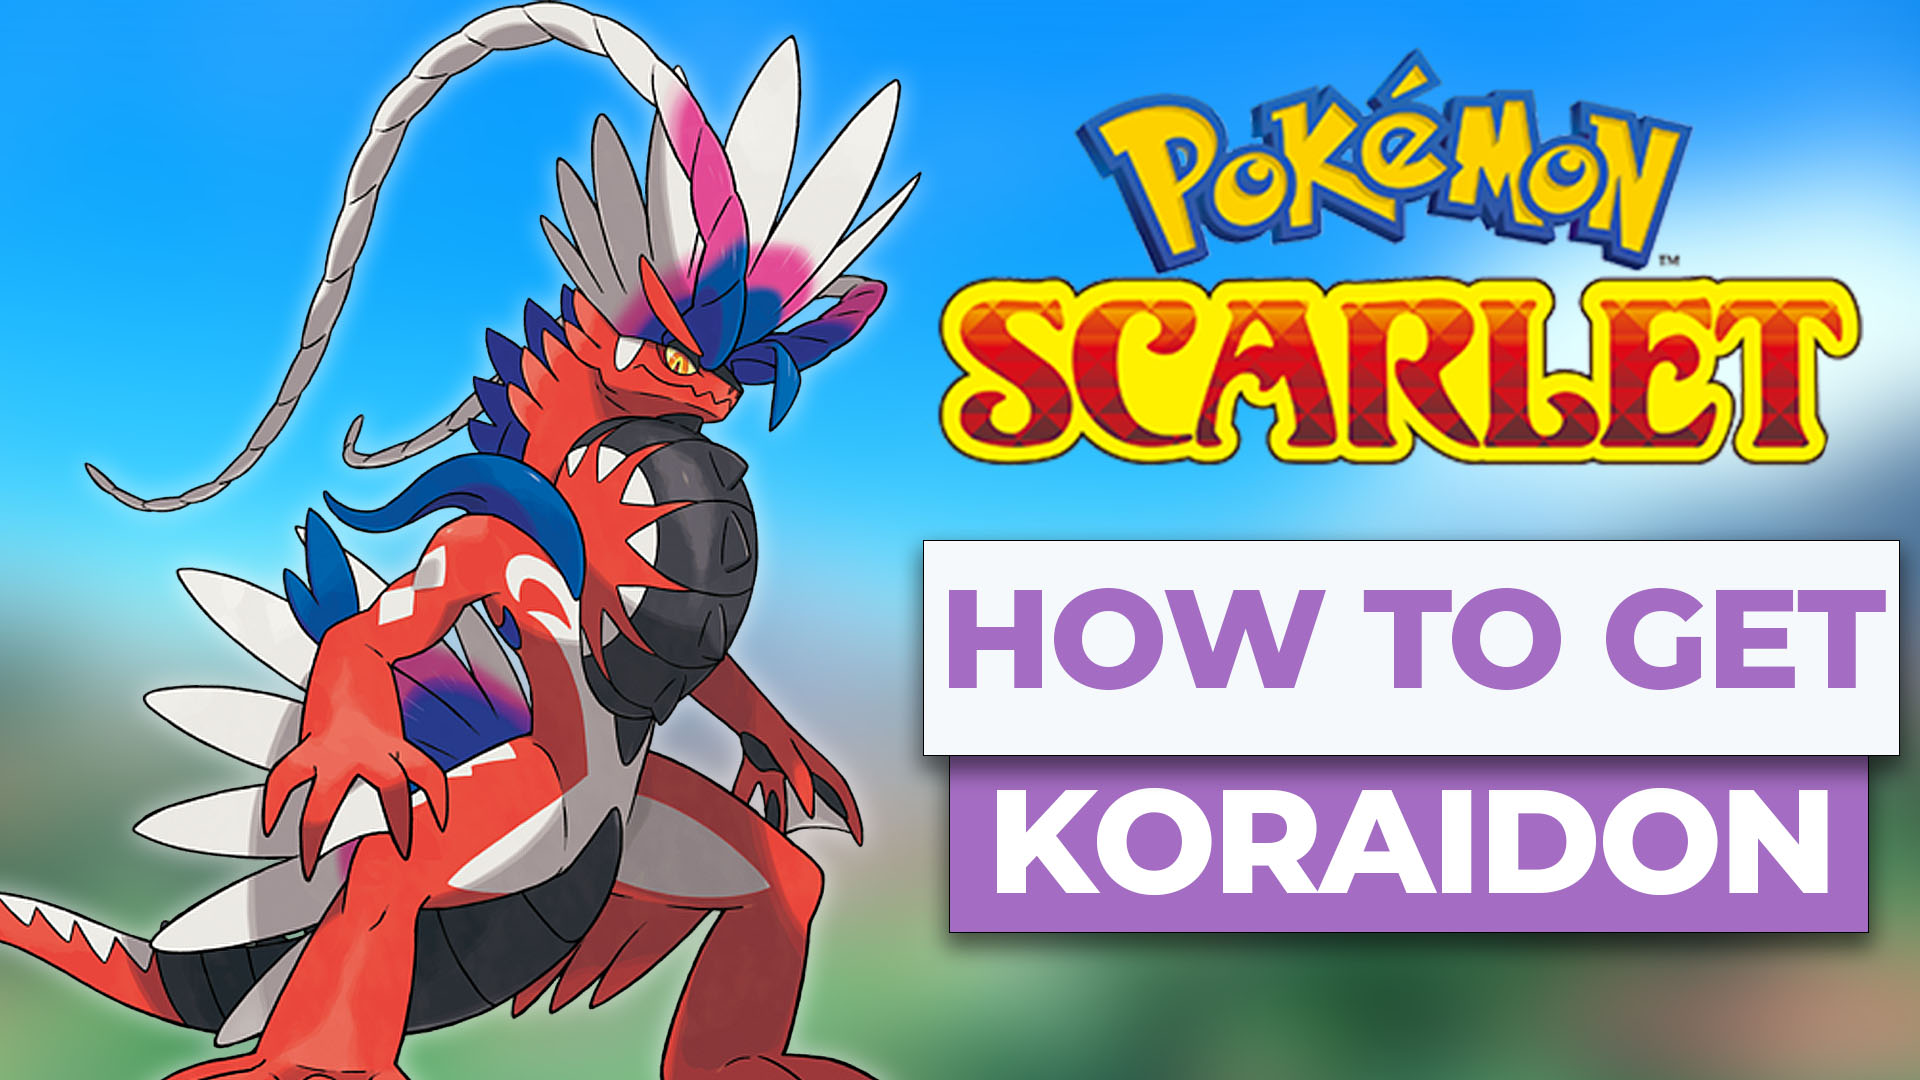 How to get Koraidon and Miraidon in Pokémon Scarlet and Violet